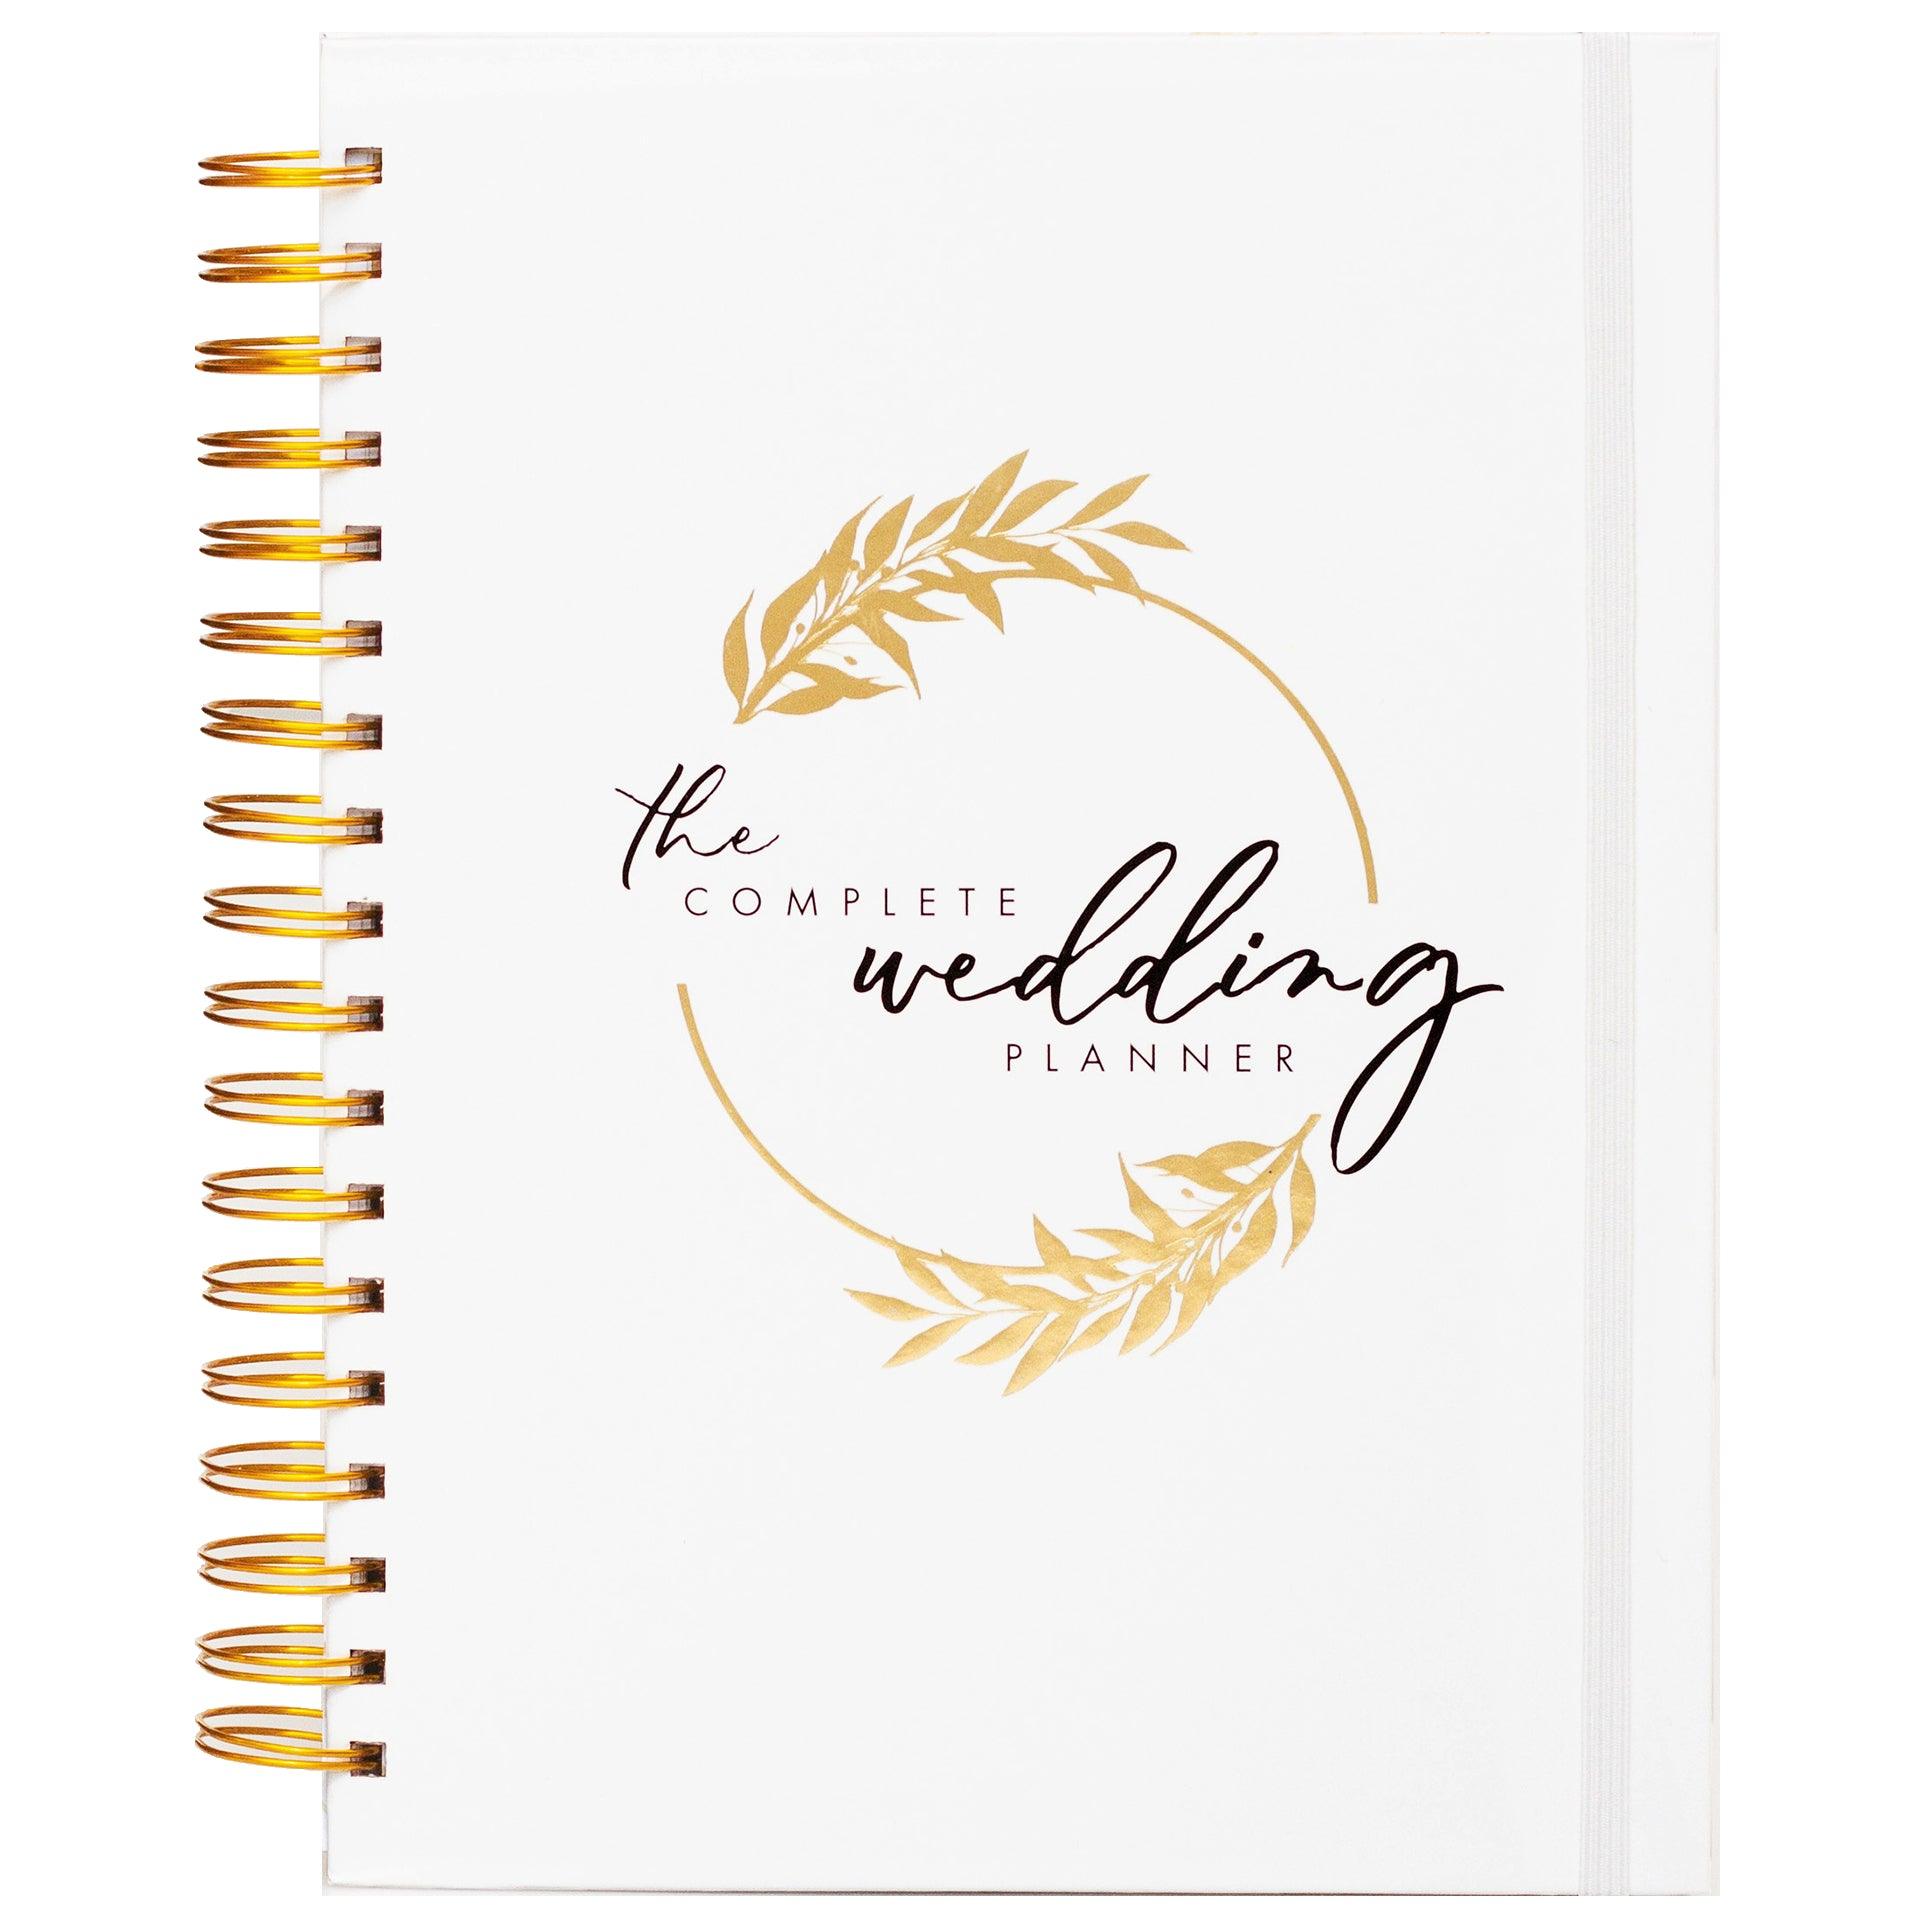 Wedding Planner Book & Organizer [New] Wedding Planning Organizer Calendar Book with Gift Box and Ribbon | Best Engagement Gift for Couples and